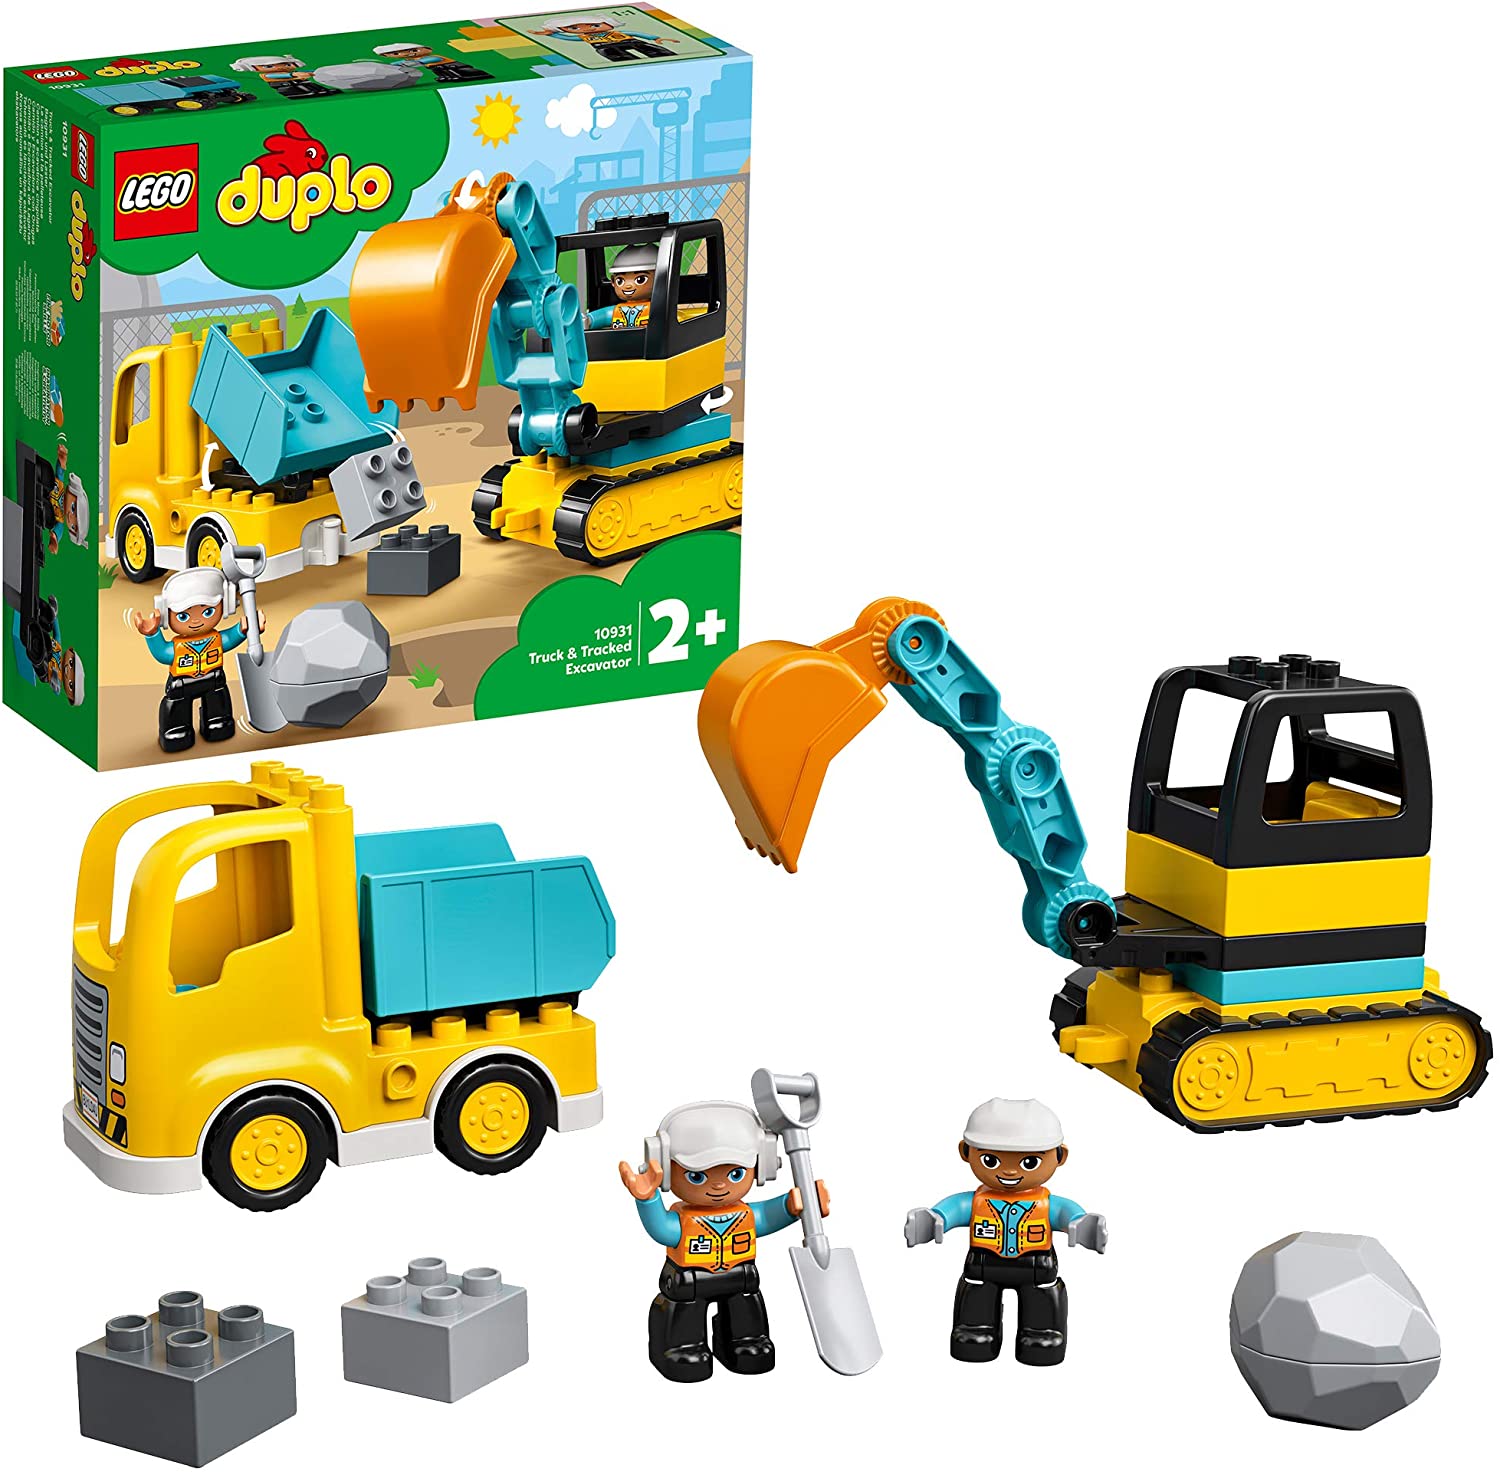 Lego 10931 Duplo Truck and Tracked Excavator Toy Set for Toddlers Aged 2 an